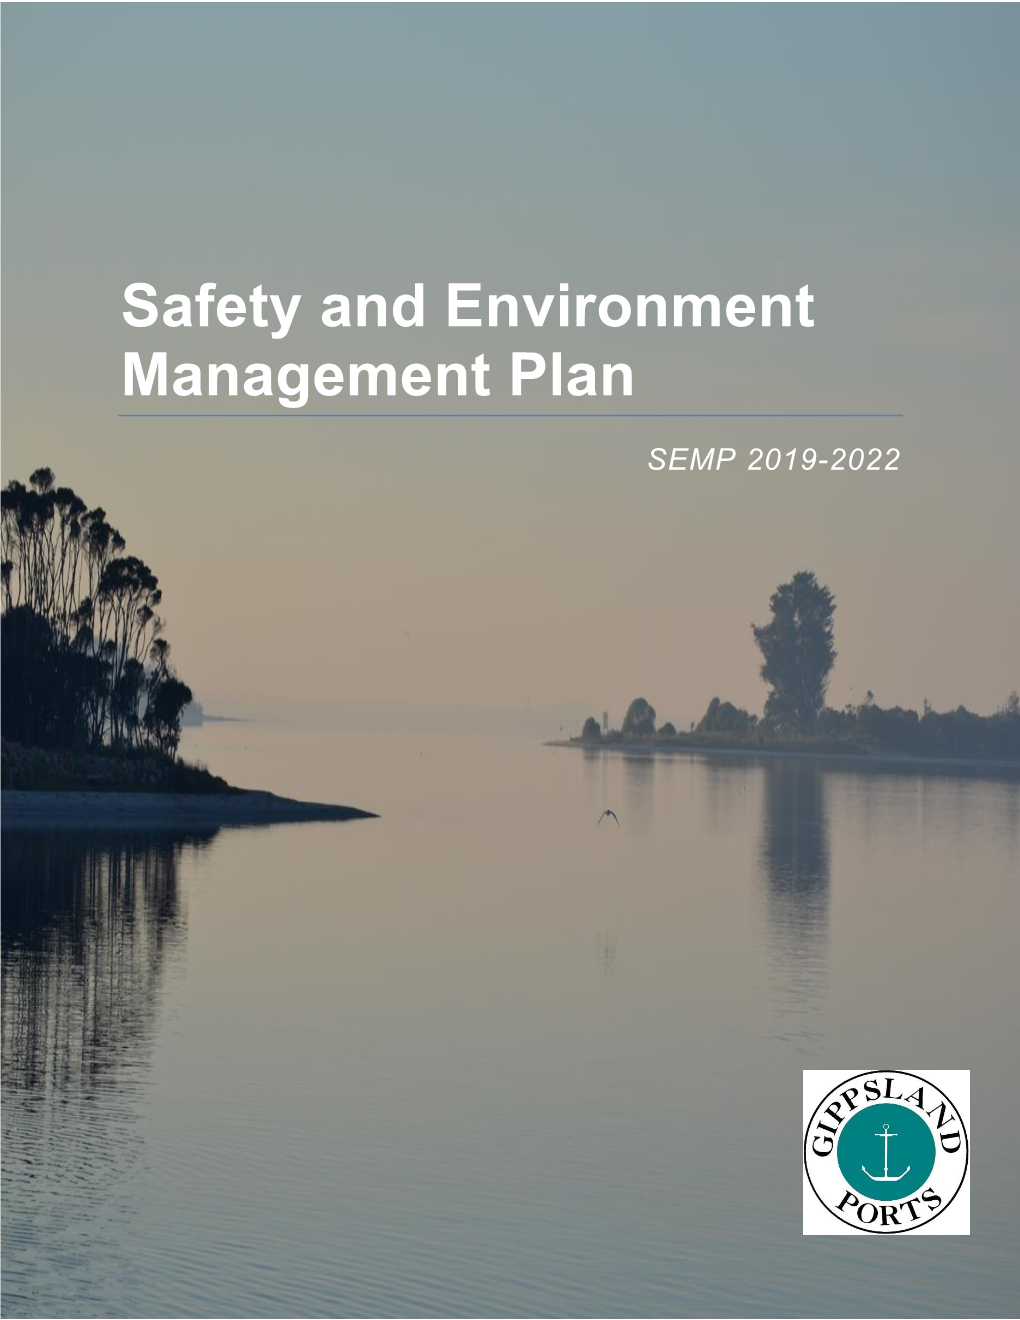 Safety and Environment Management Plan